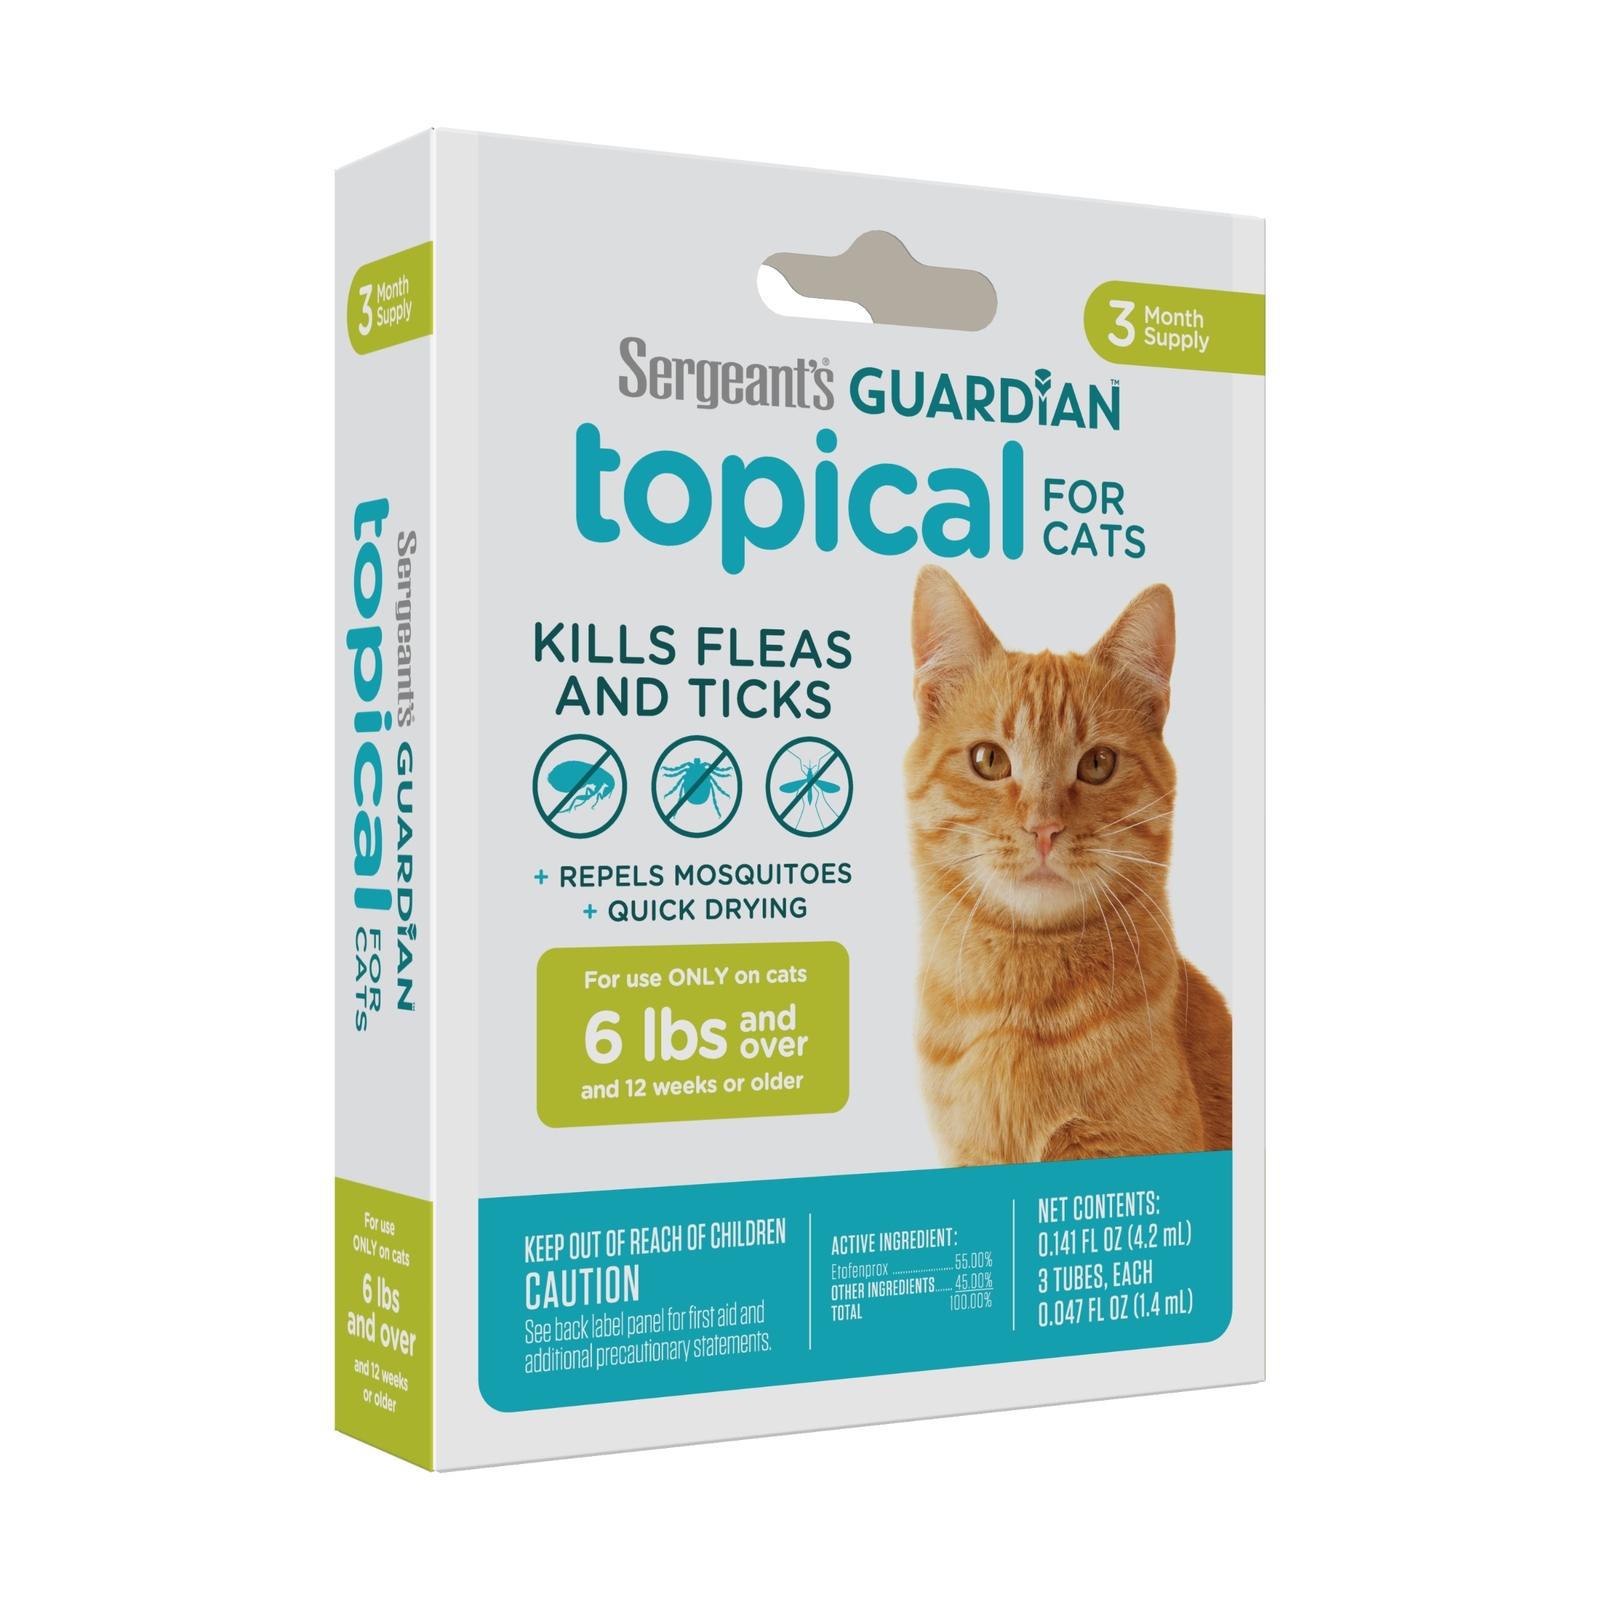 Sergeant's Guardian's Flea & Tick Topical for Cat's, 6lbs and Over, 3 Count